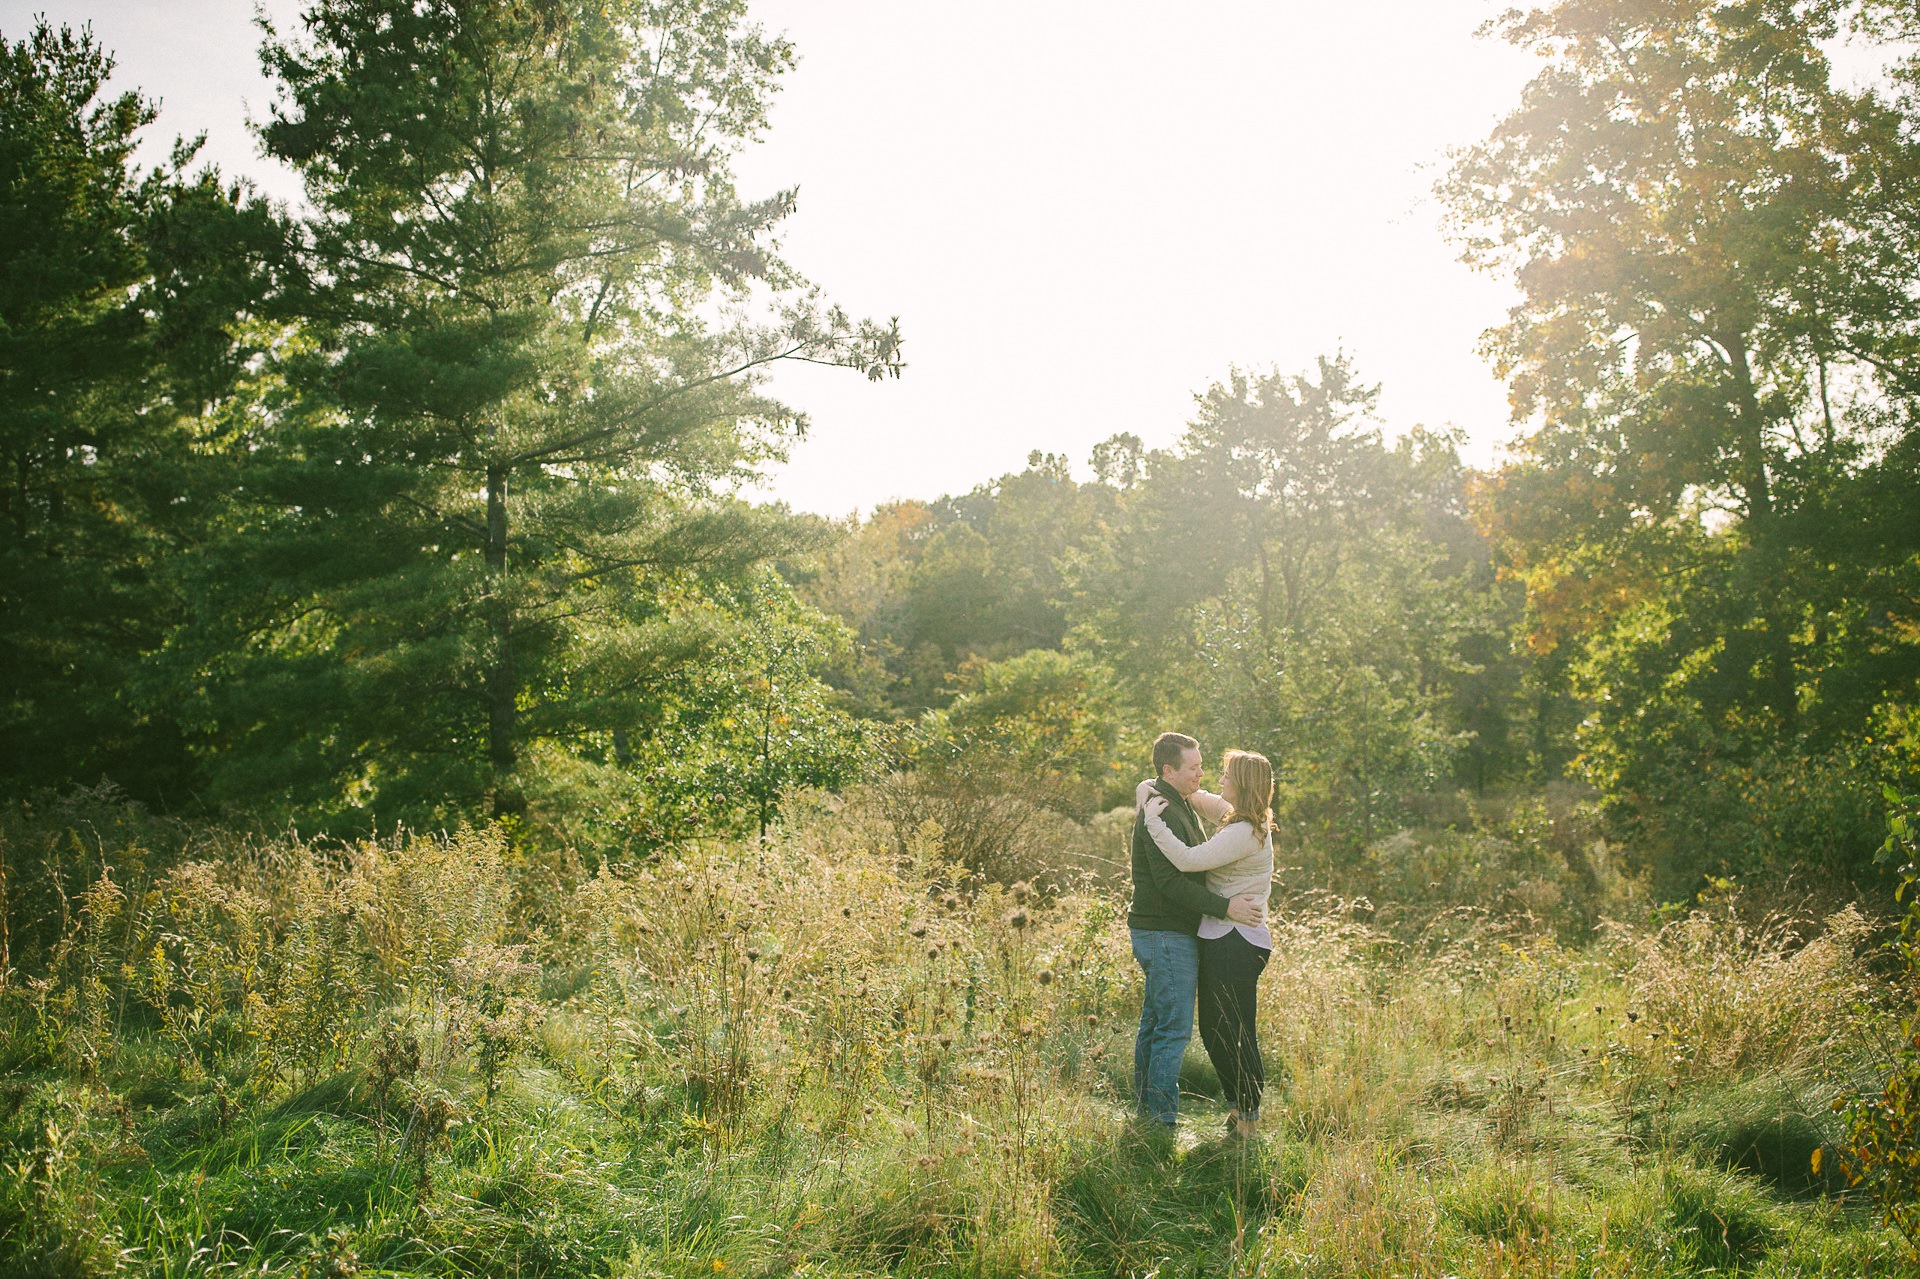 Cleveland Fall Engagement Session at Pattersons Fruit Farm 9.jpg